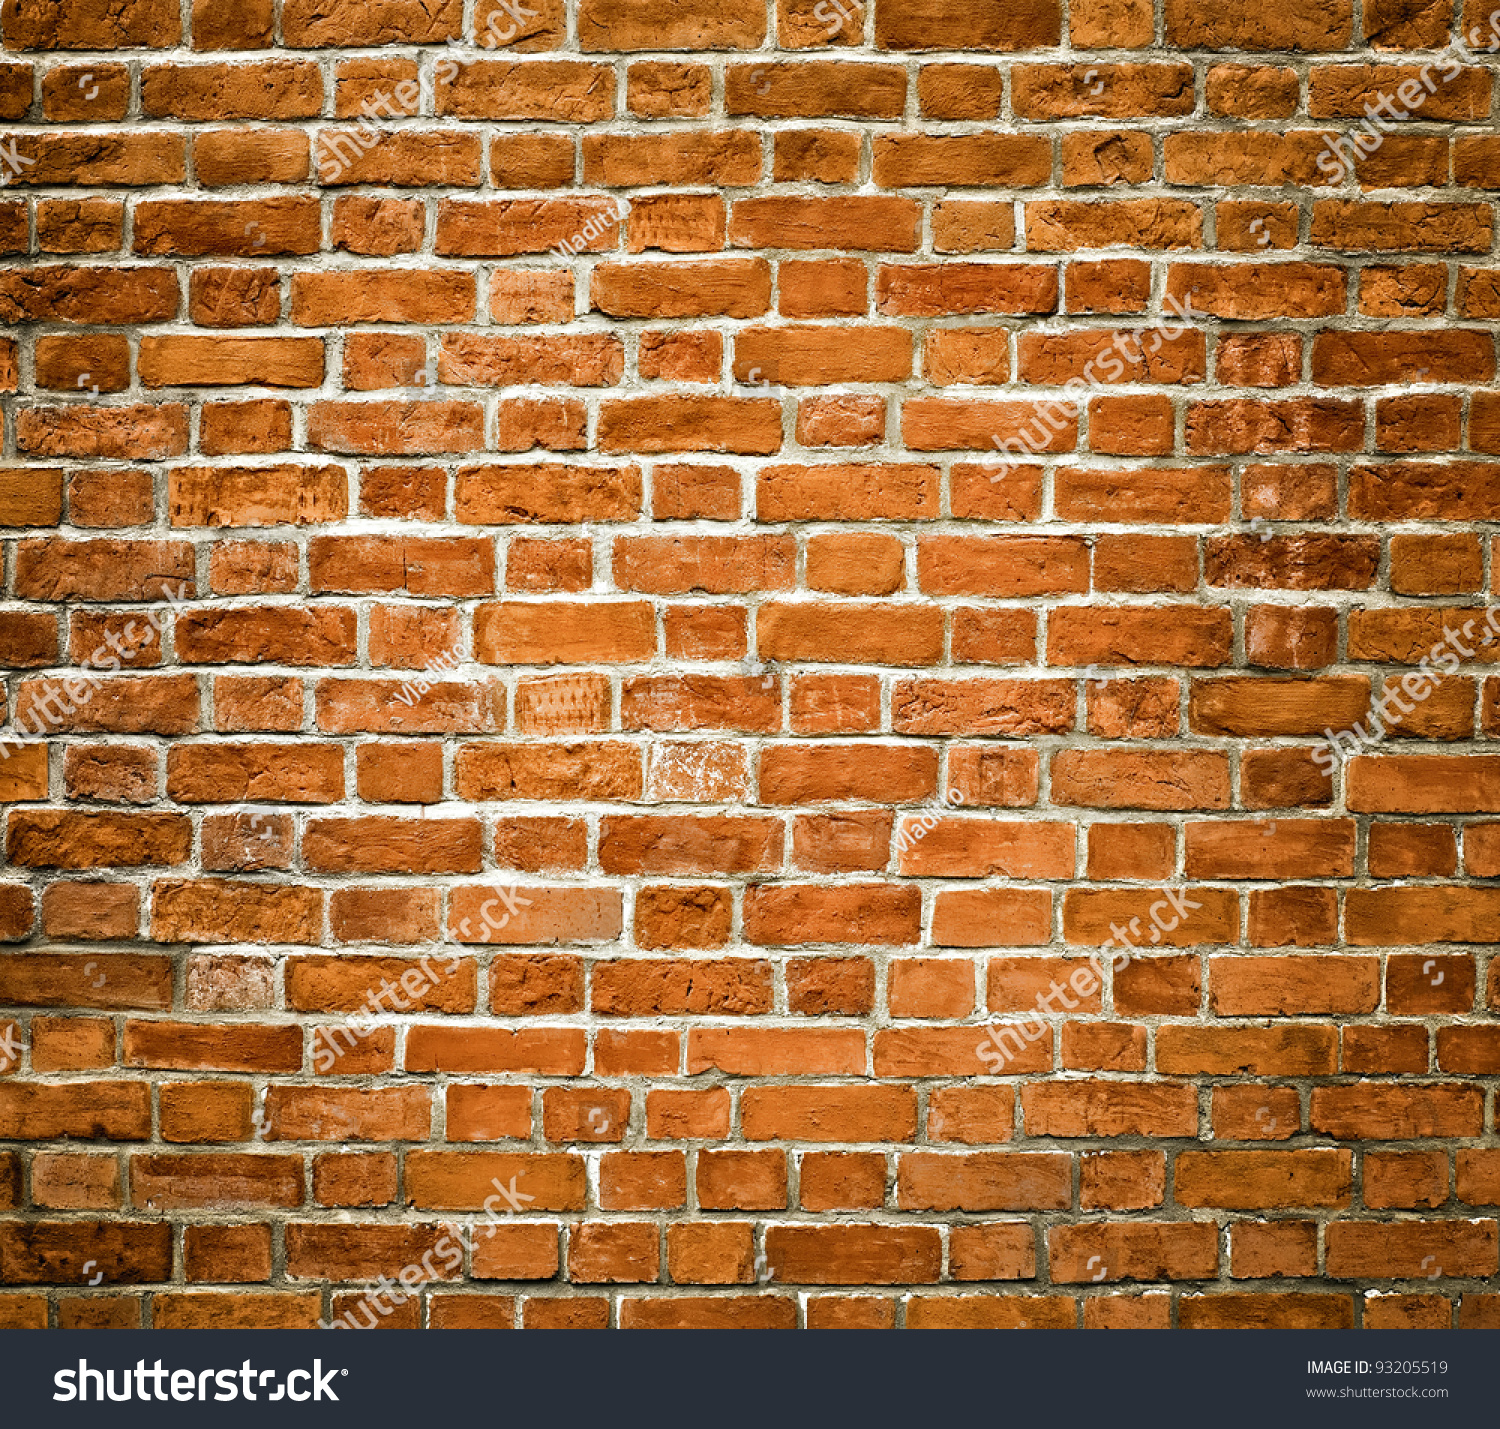 Background of brick wall texture #93205519